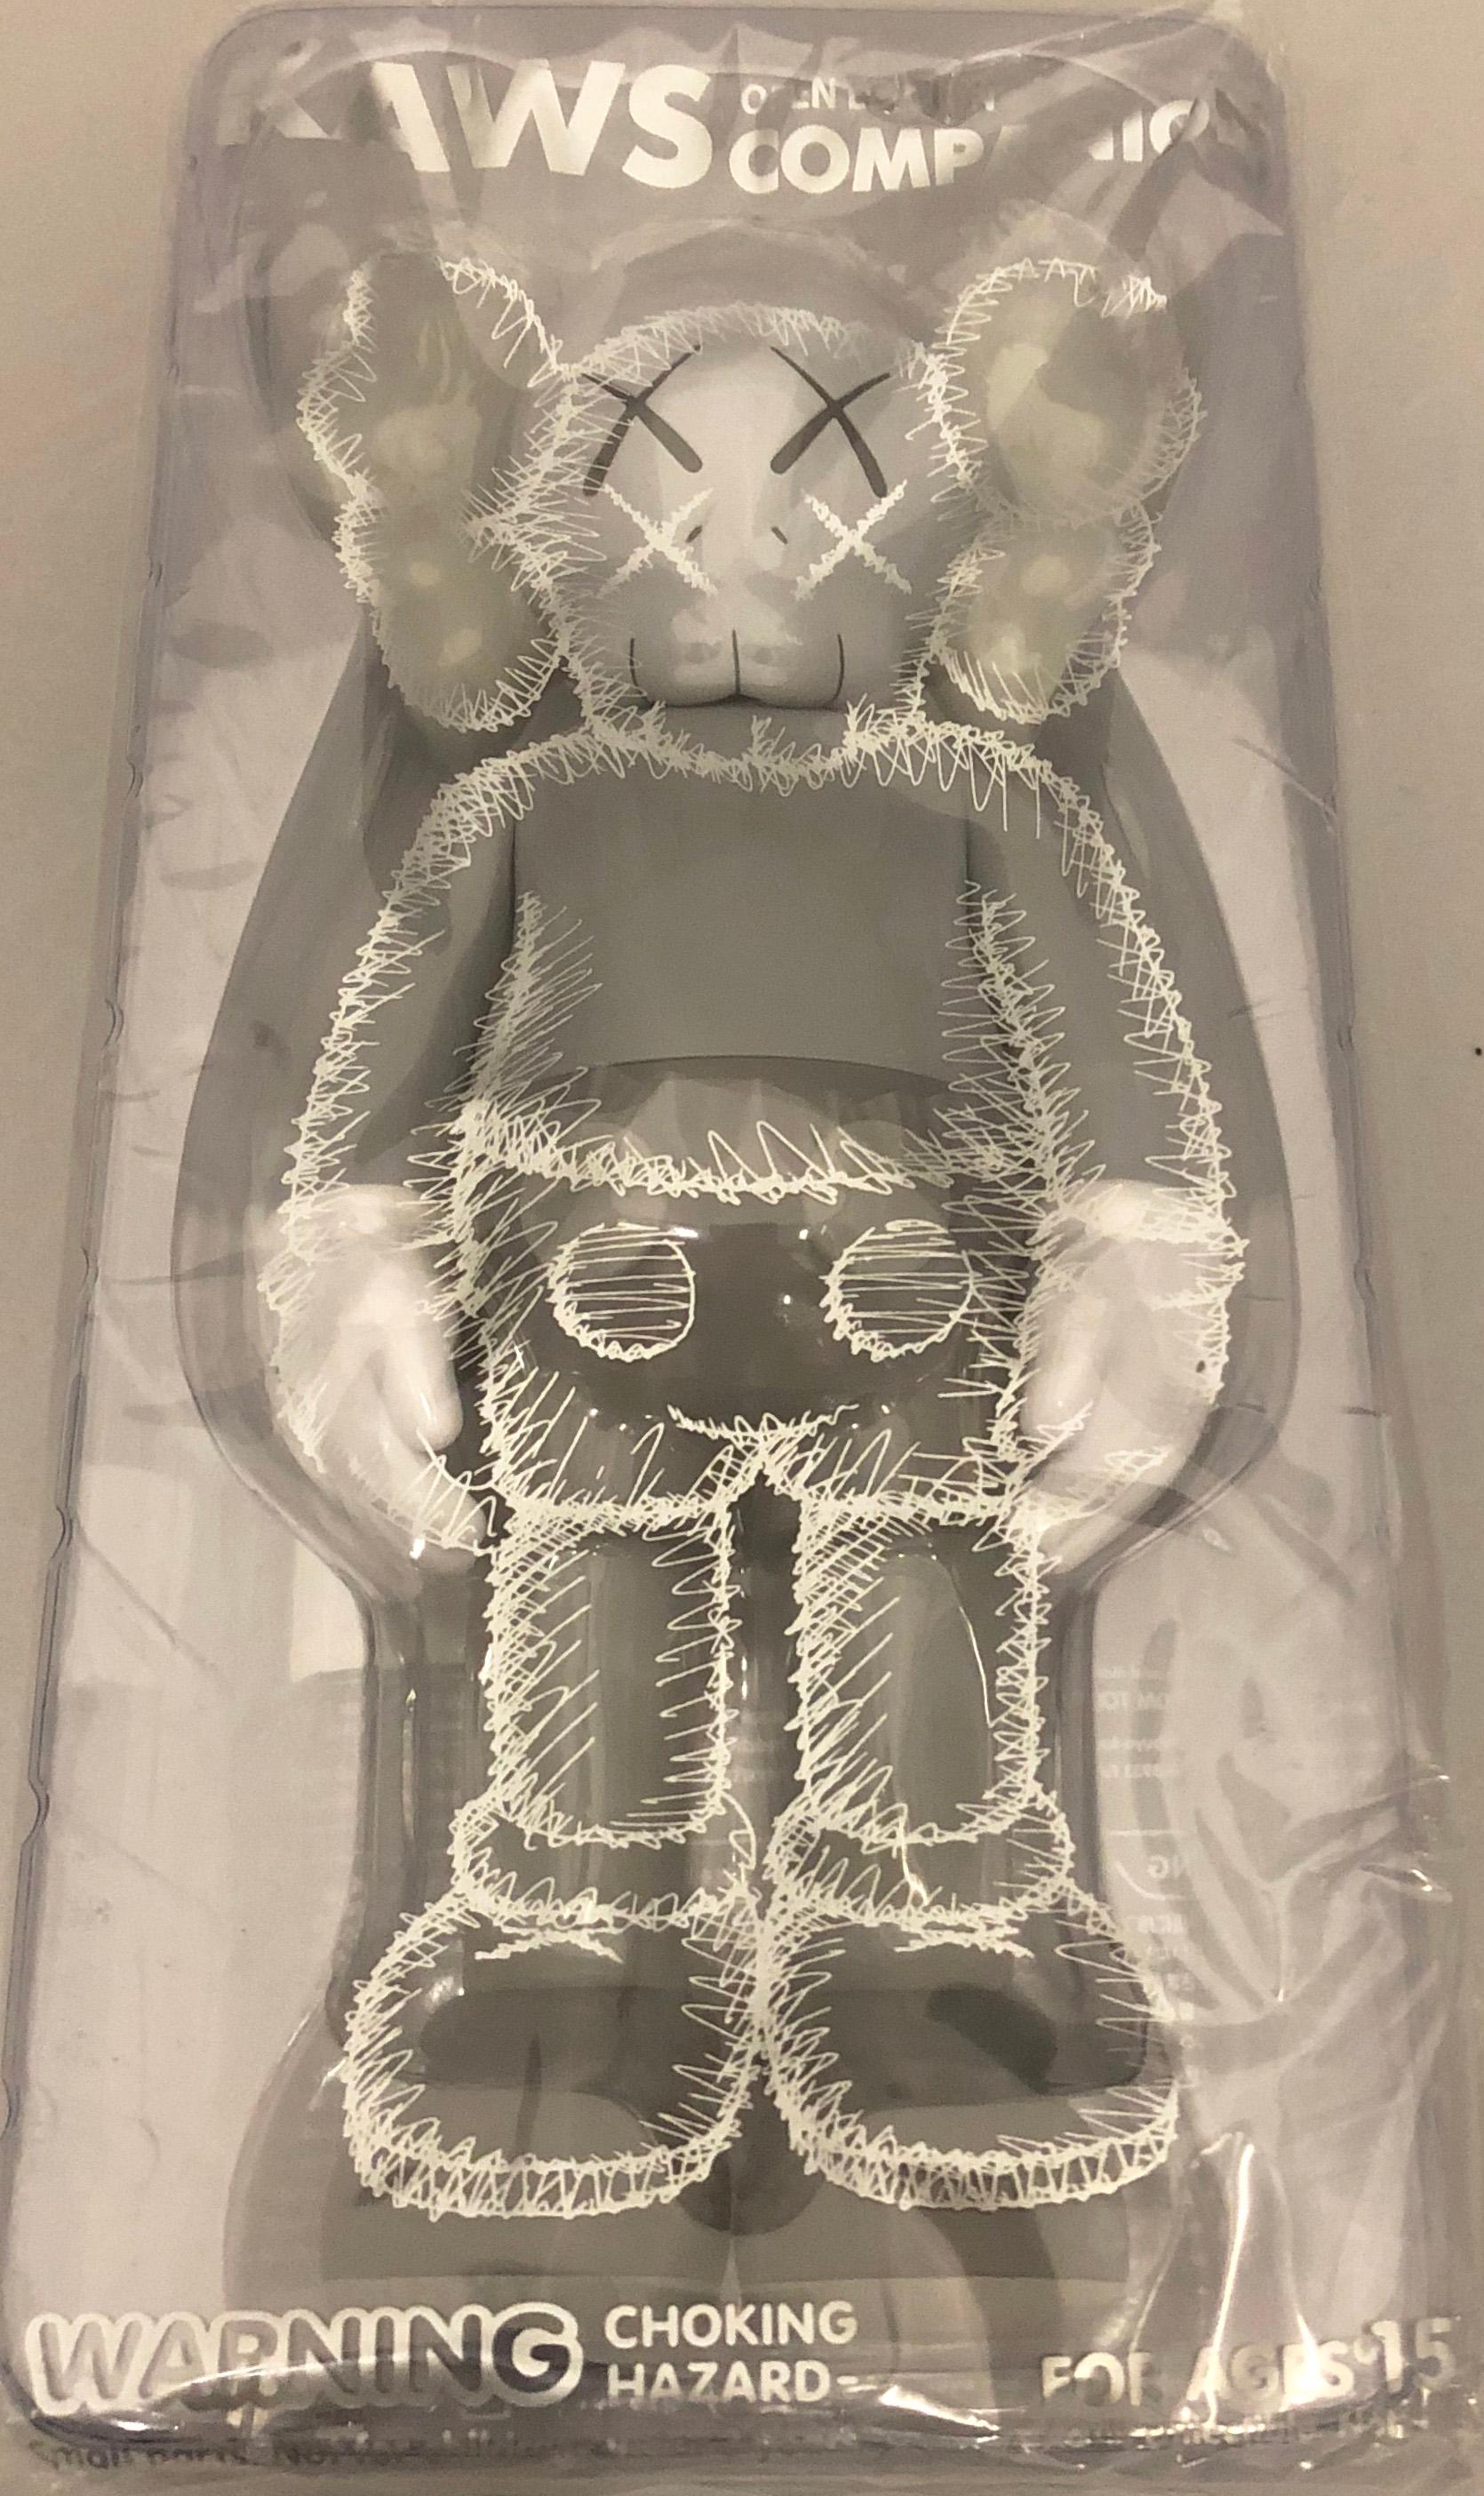 KAWS Companion Grey: set of 2 individual works; 2016. Each new and sealed in their original packaging. Published by Medicom Japan in conjunction with the exhibition, KAWS: Where The End Starts at the Modern Art Museum of Fort Worth. These figurines